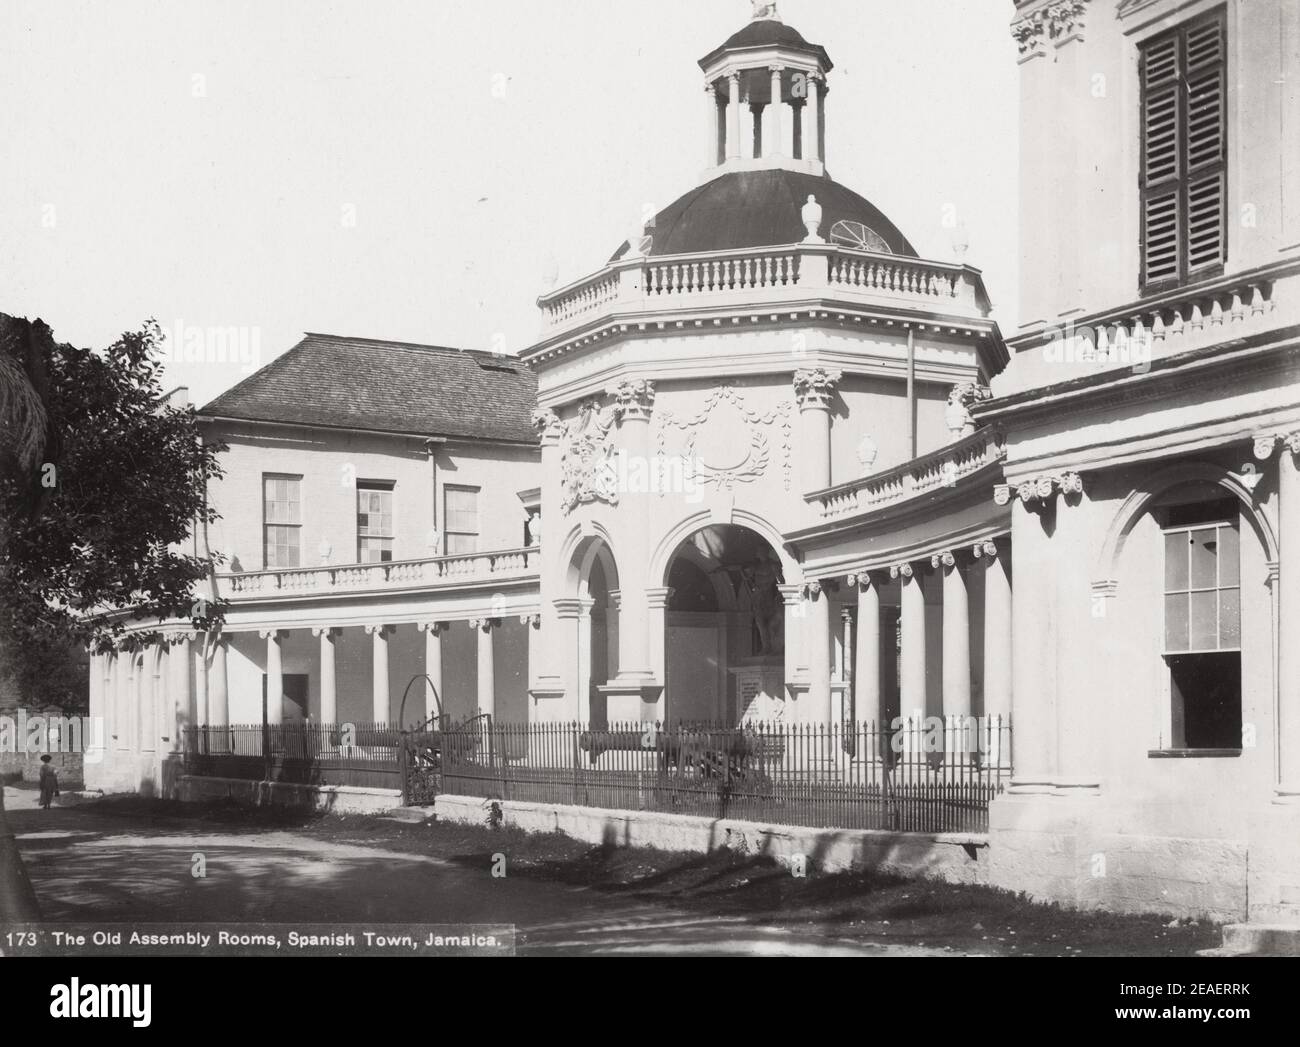 Late 19th century/1900 vintage photograph: Old Assembly Rooms, Spanish Town Jamaica. Stock Photo